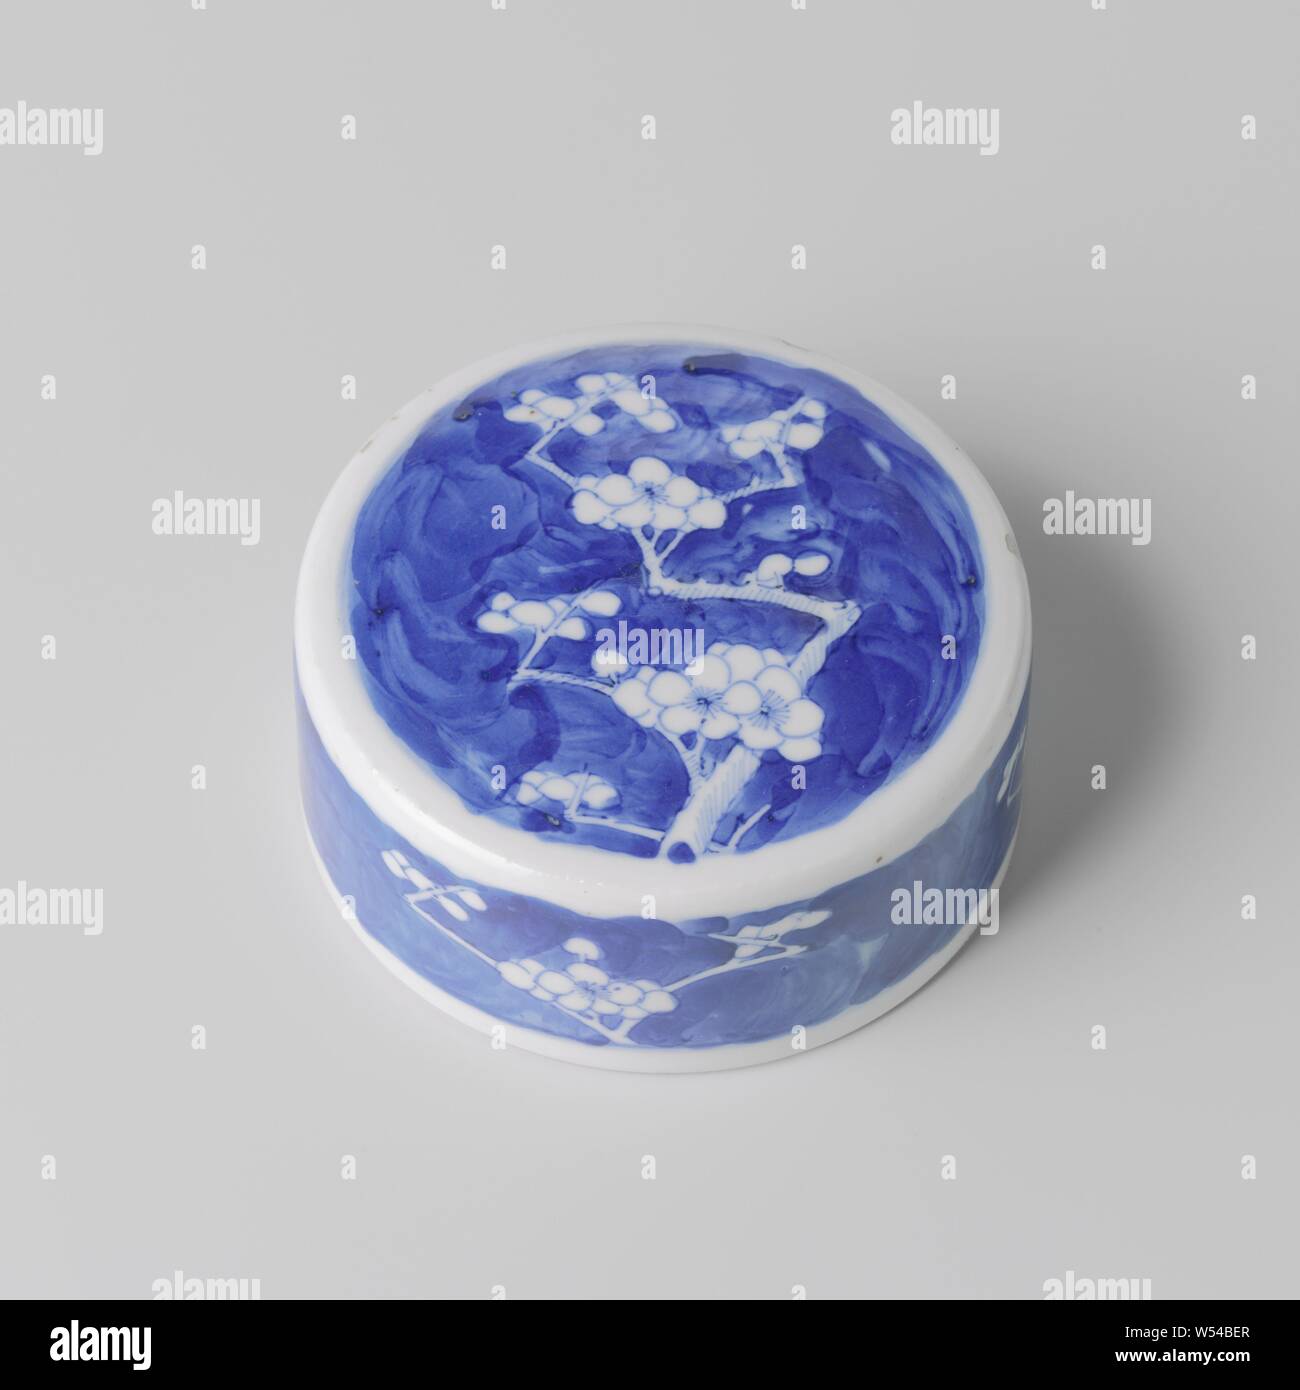 Cover with prunus sprays, Porcelain lid, painted in underglaze blue. On the top and the wall prunus branches saved in a blue background. Blue White., anonymous, China, c. 1680 - c. 1720, Qing-dynasty (1644-1912) / Kangxi-period (1662-1722), porcelain (material), glaze, cobalt (mineral), vitrification, d 12 cm Stock Photo